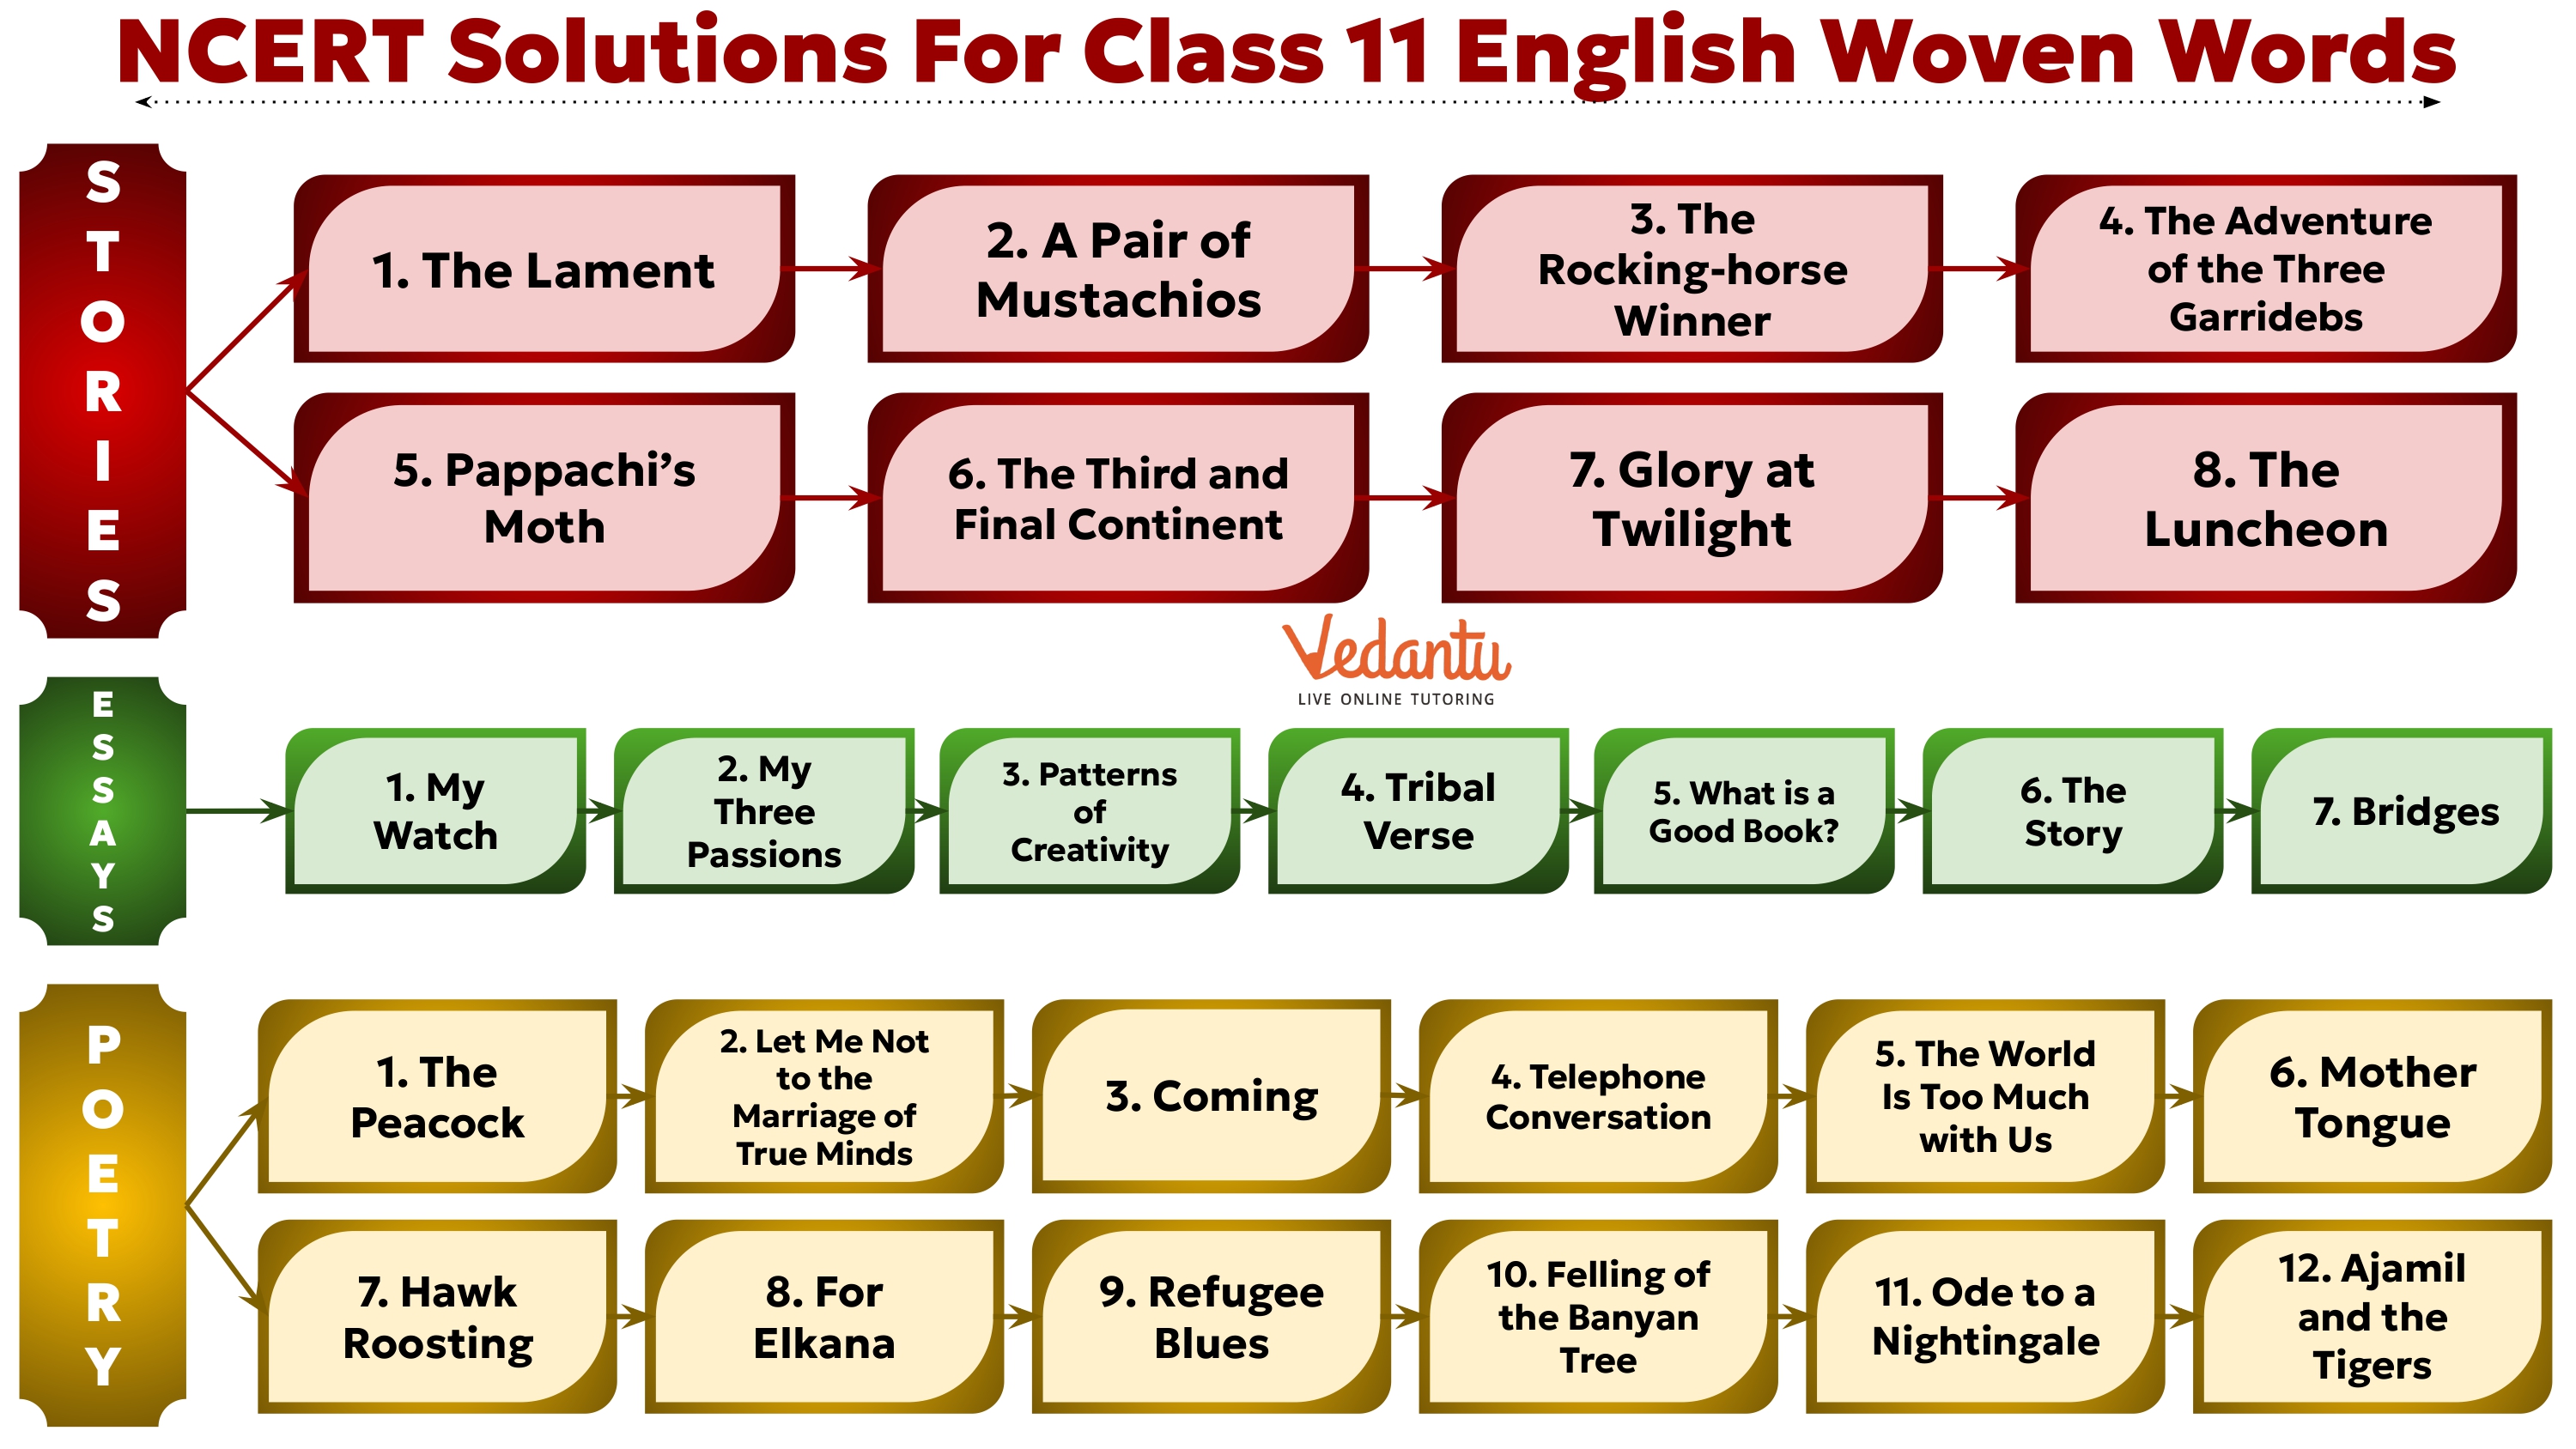 NCERT Solutions for Class 11 English Woven Words Chapter-wise Overview